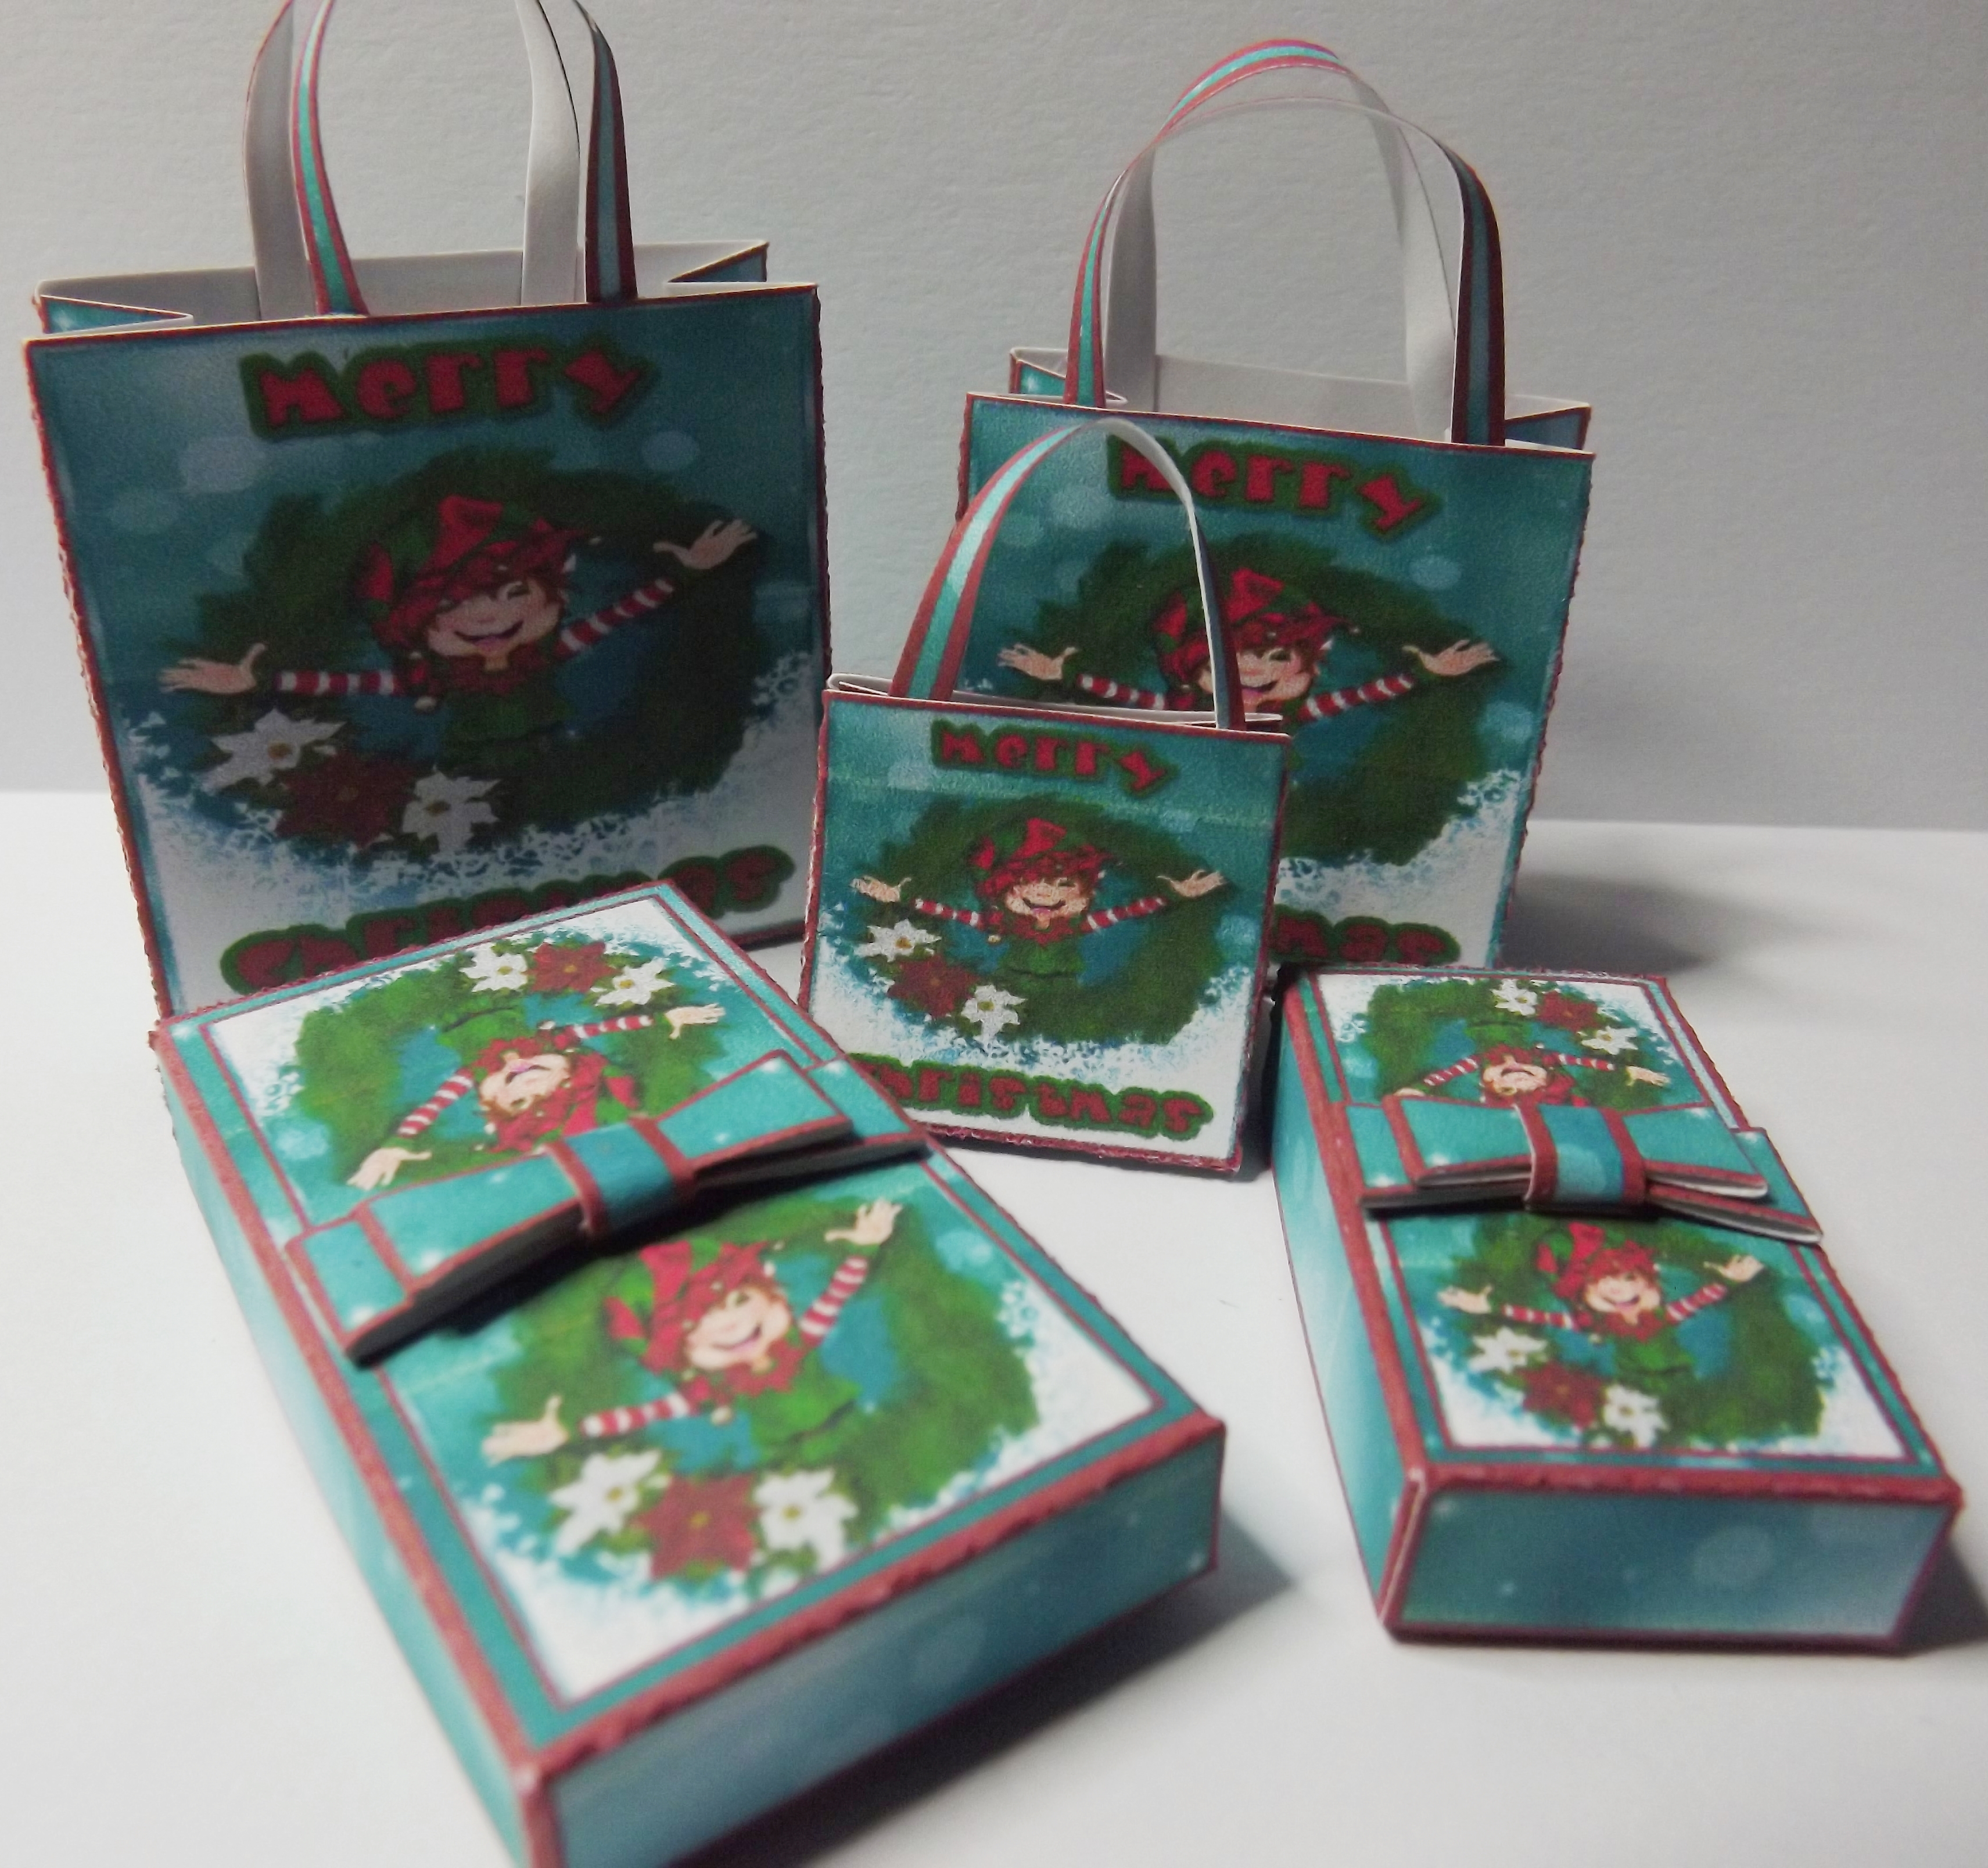 HAPPY HOLIDAYS CHRISTMAS BOXES & BAGS KIT 4